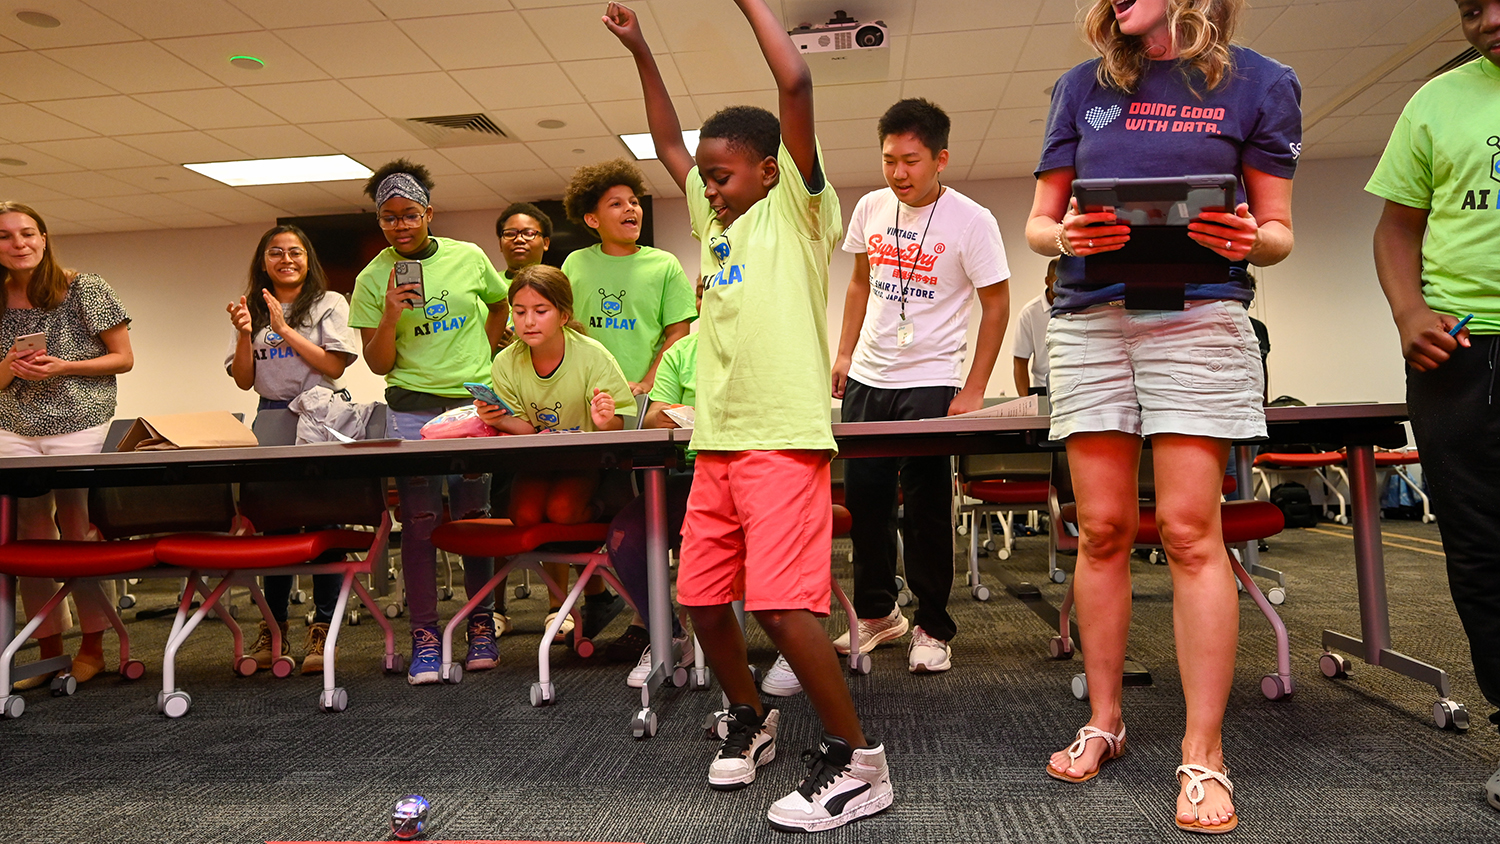 Students from PItt county visited Centennial Campus for an engineering computer science camp that dealt with AI and robotics. Students coded movement of a small, spherical robot around an obstical course.